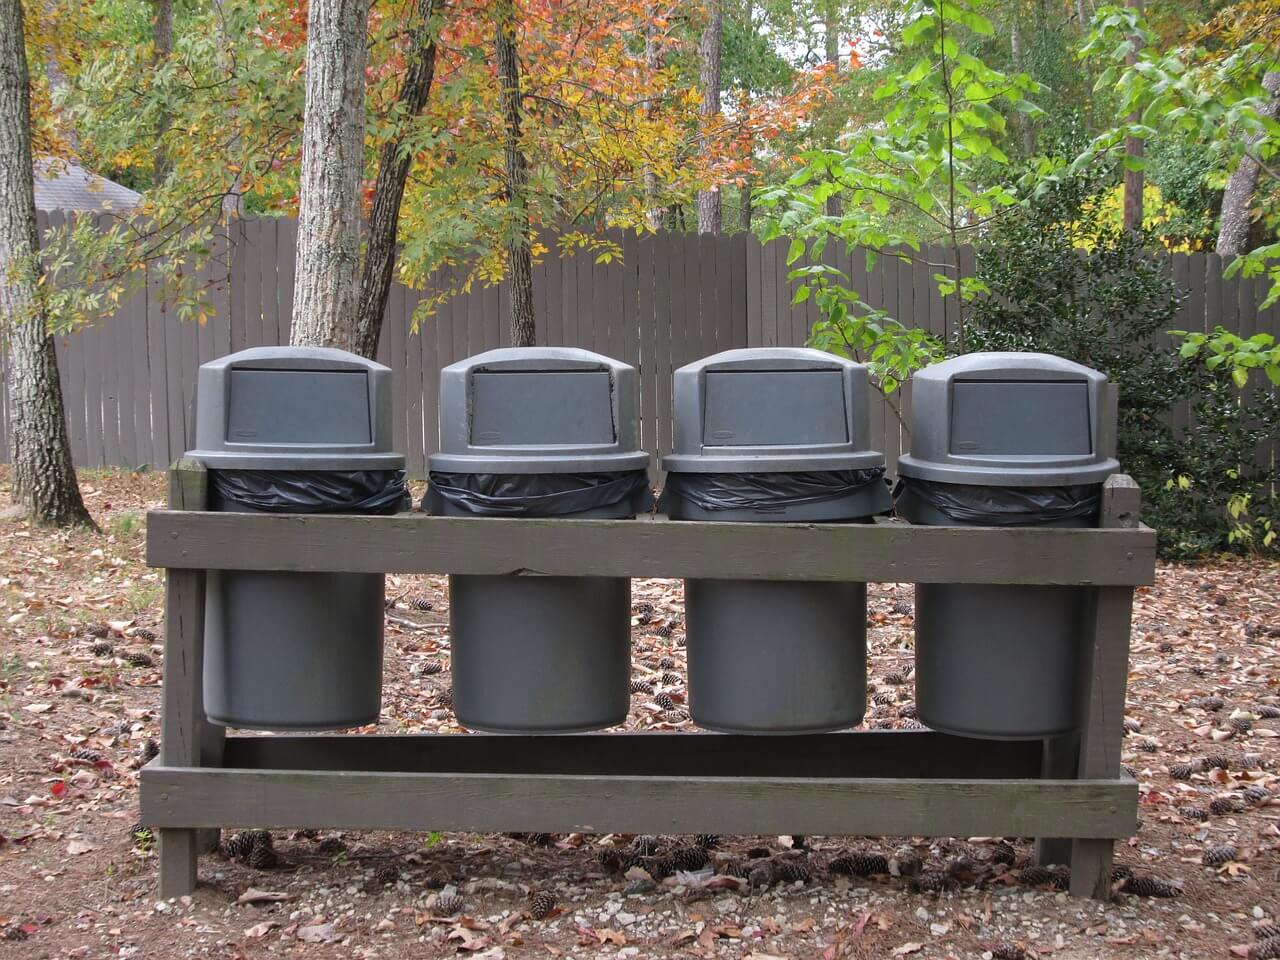 Row of Trash Cans